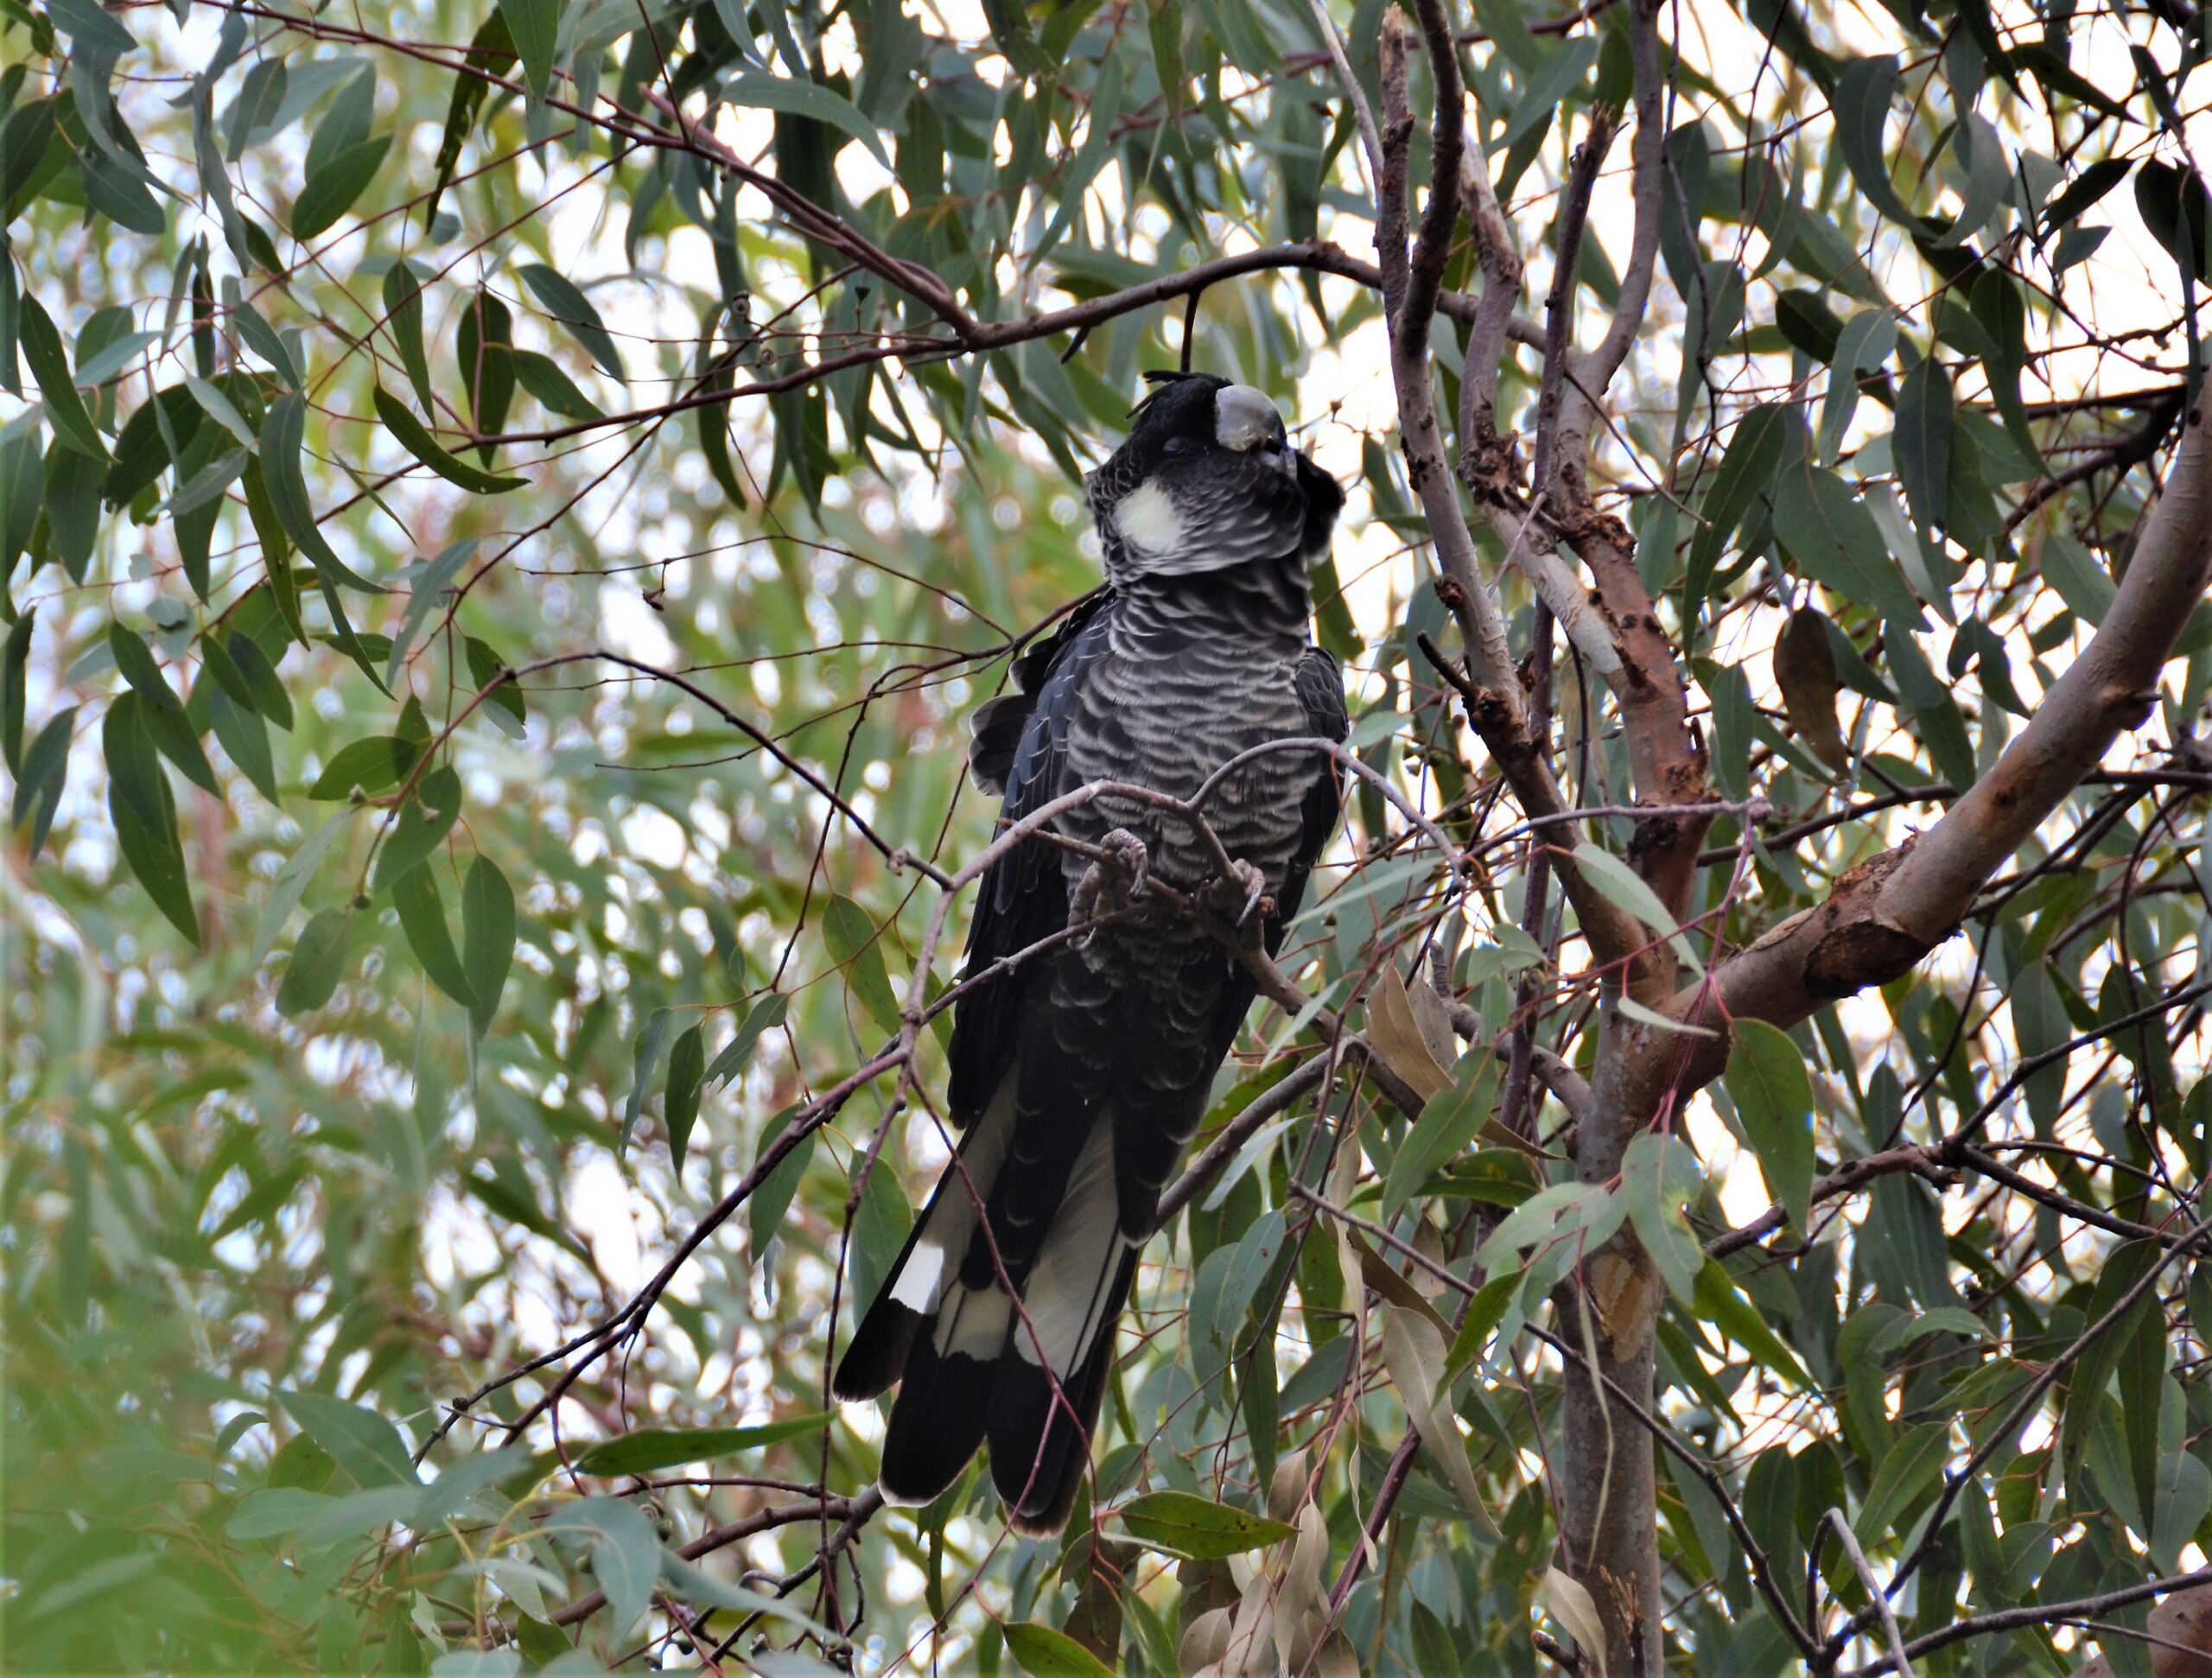 This is a photograph of a Baudin’s black cockatoo. The photo was taken from below, and shows the bird resting on a tree branch while chewing on a twig. The bird is mostly black in colour with a grey beak and patches of white on its cheek, breast and tail. The tree branch is brown and its leaves are long and green. The sky appears to be white, and is seen through the foliage.